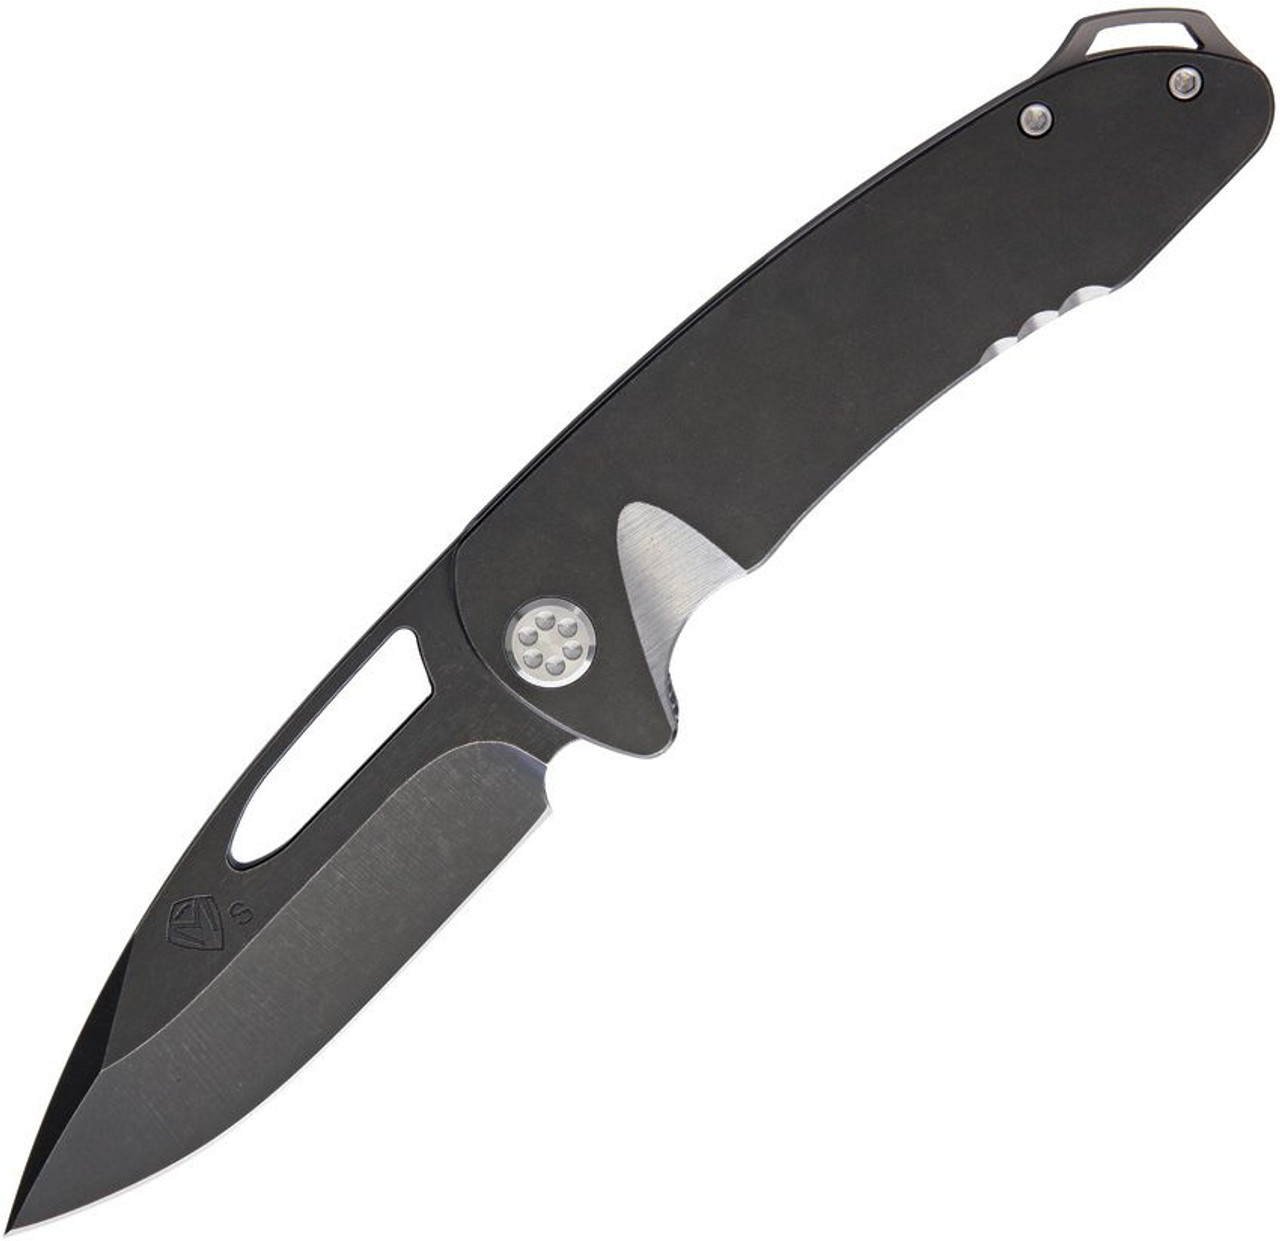 Medford Knife & Tool On Belay Frame Lock Knife (MD038SJQ31PT) - 4.125in CPM S35VN Black PVD Coated Drop Point Blade, Black PVD Coated Titanium Handle